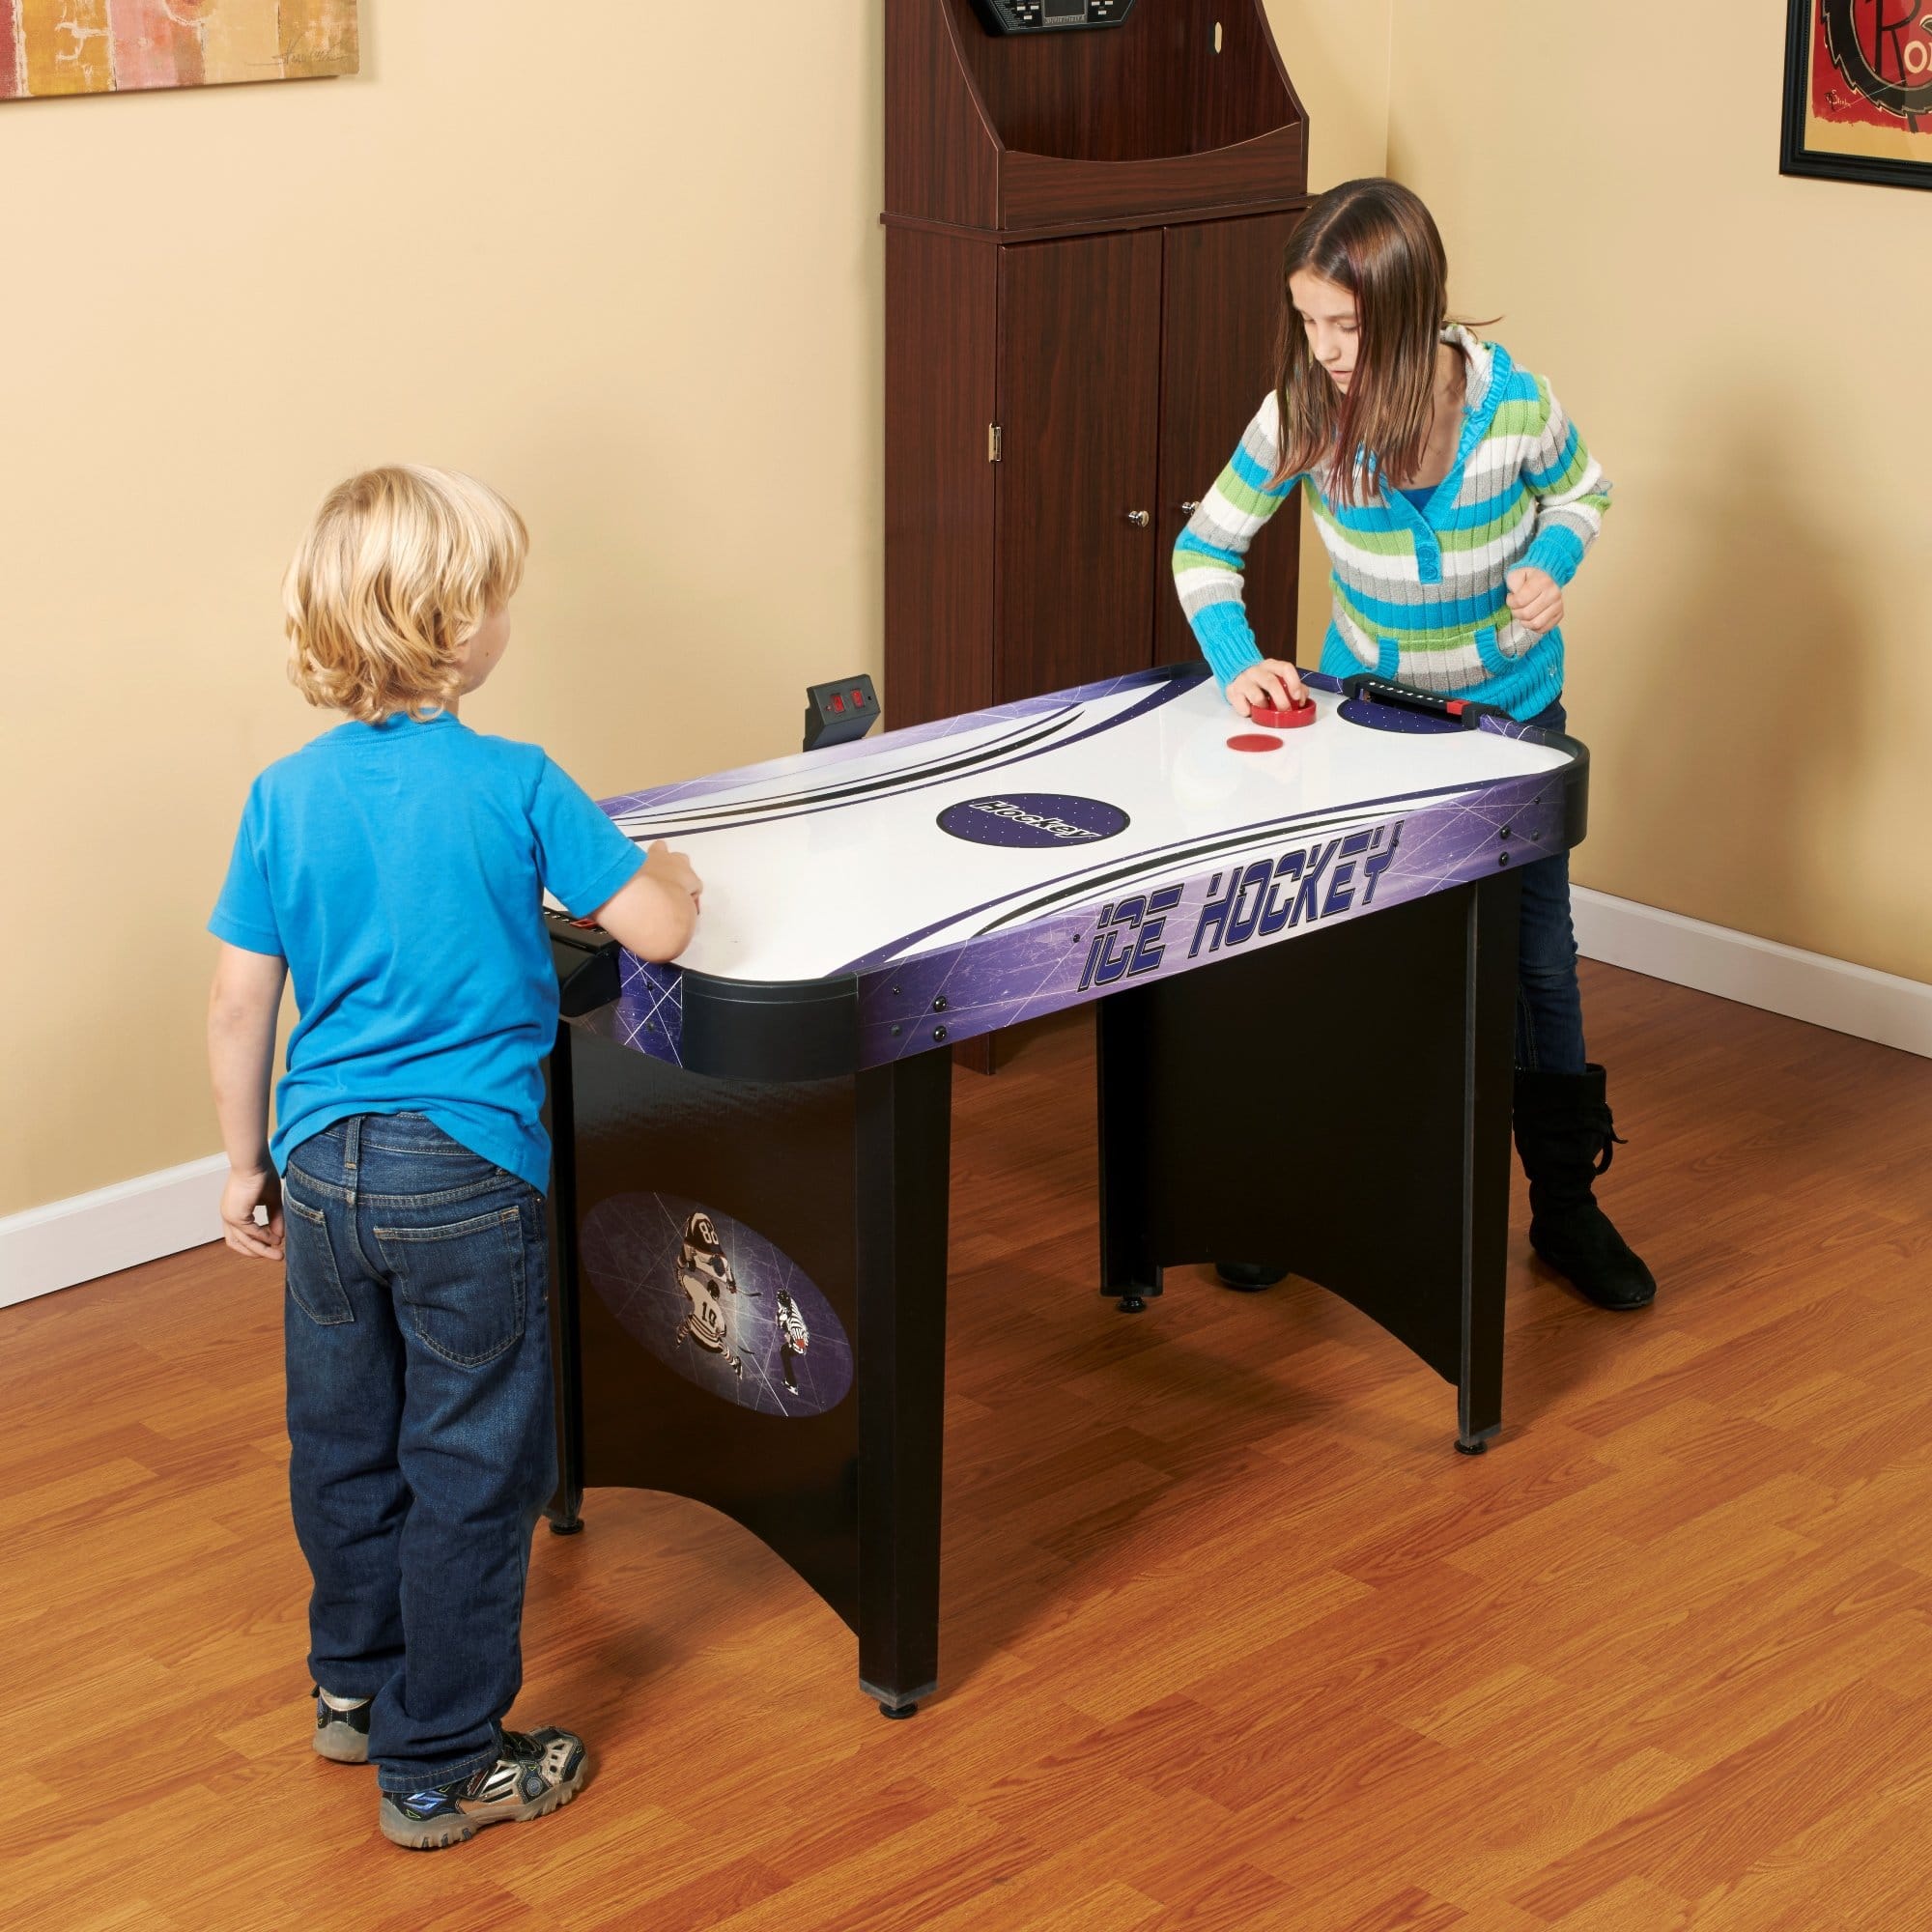 Two kids playing on Hathaway Hat Trick Air Hockey table